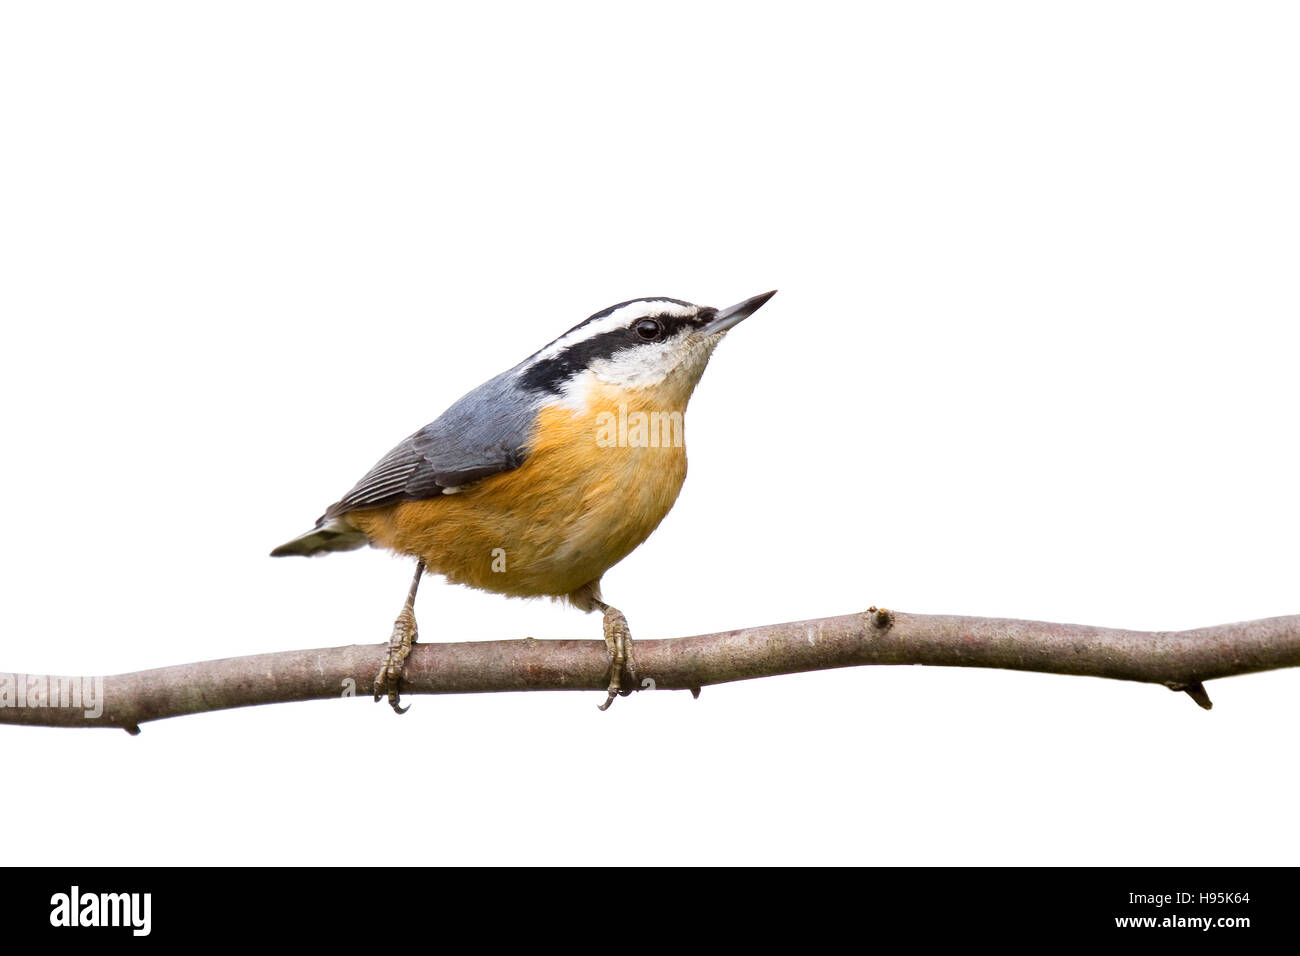 Red-breasted nuthatch perched on a branch in search of food; isolated on a white background Stock Photo